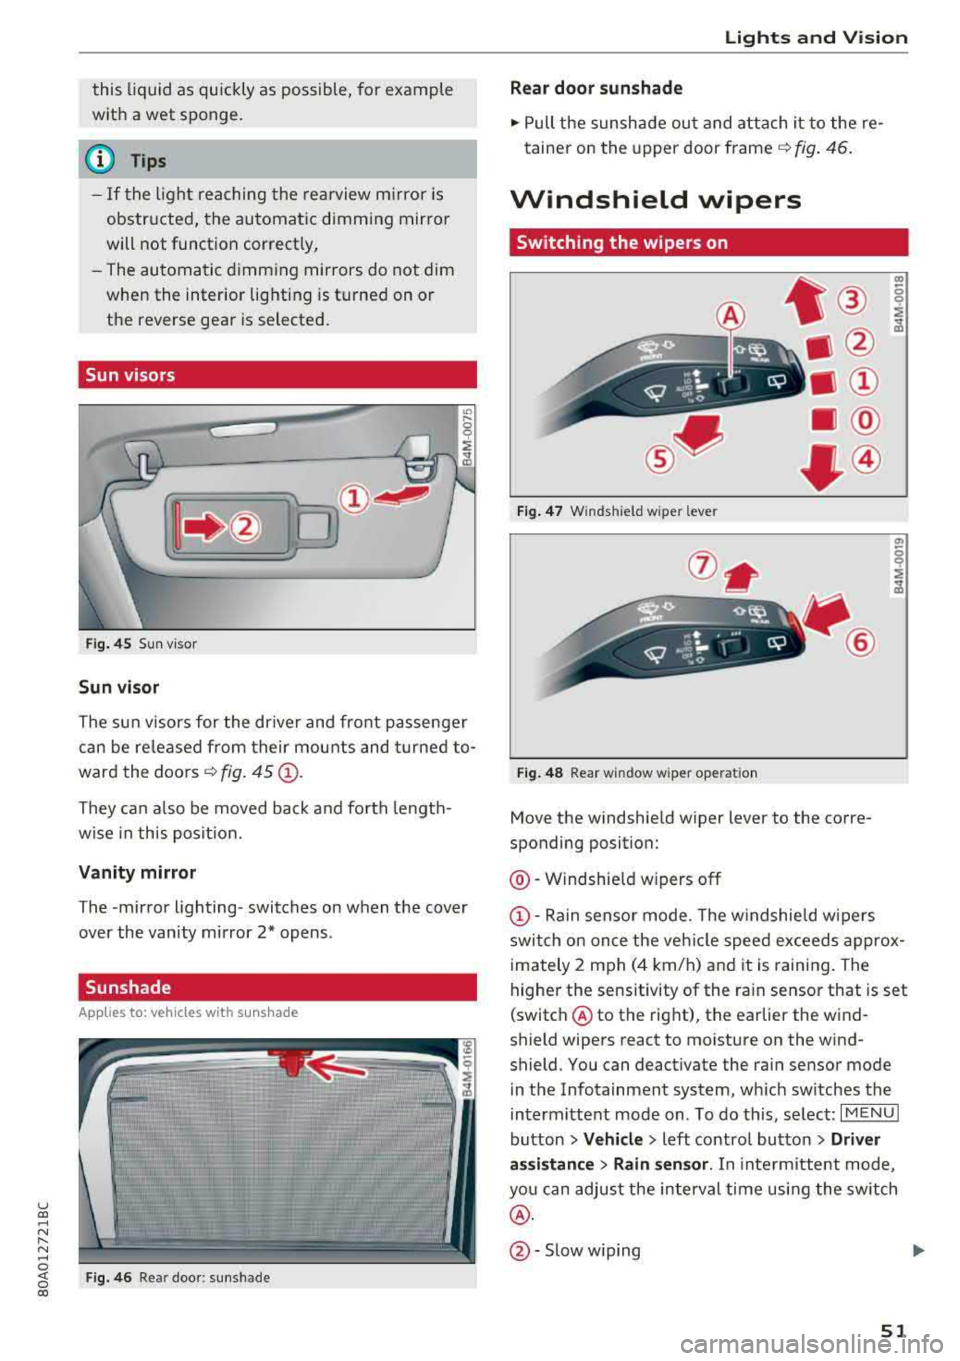 AUDI Q5 2018  Owners Manual u co ..... N r-­N ..... 
~ 0 co 
this liquid  as quickly  as possible,  for example 
with  a wet  sponge. 
@ Tips 
- If the  light  reaching  the  rearview mirror  is 
obstructed,  the  automatic  di